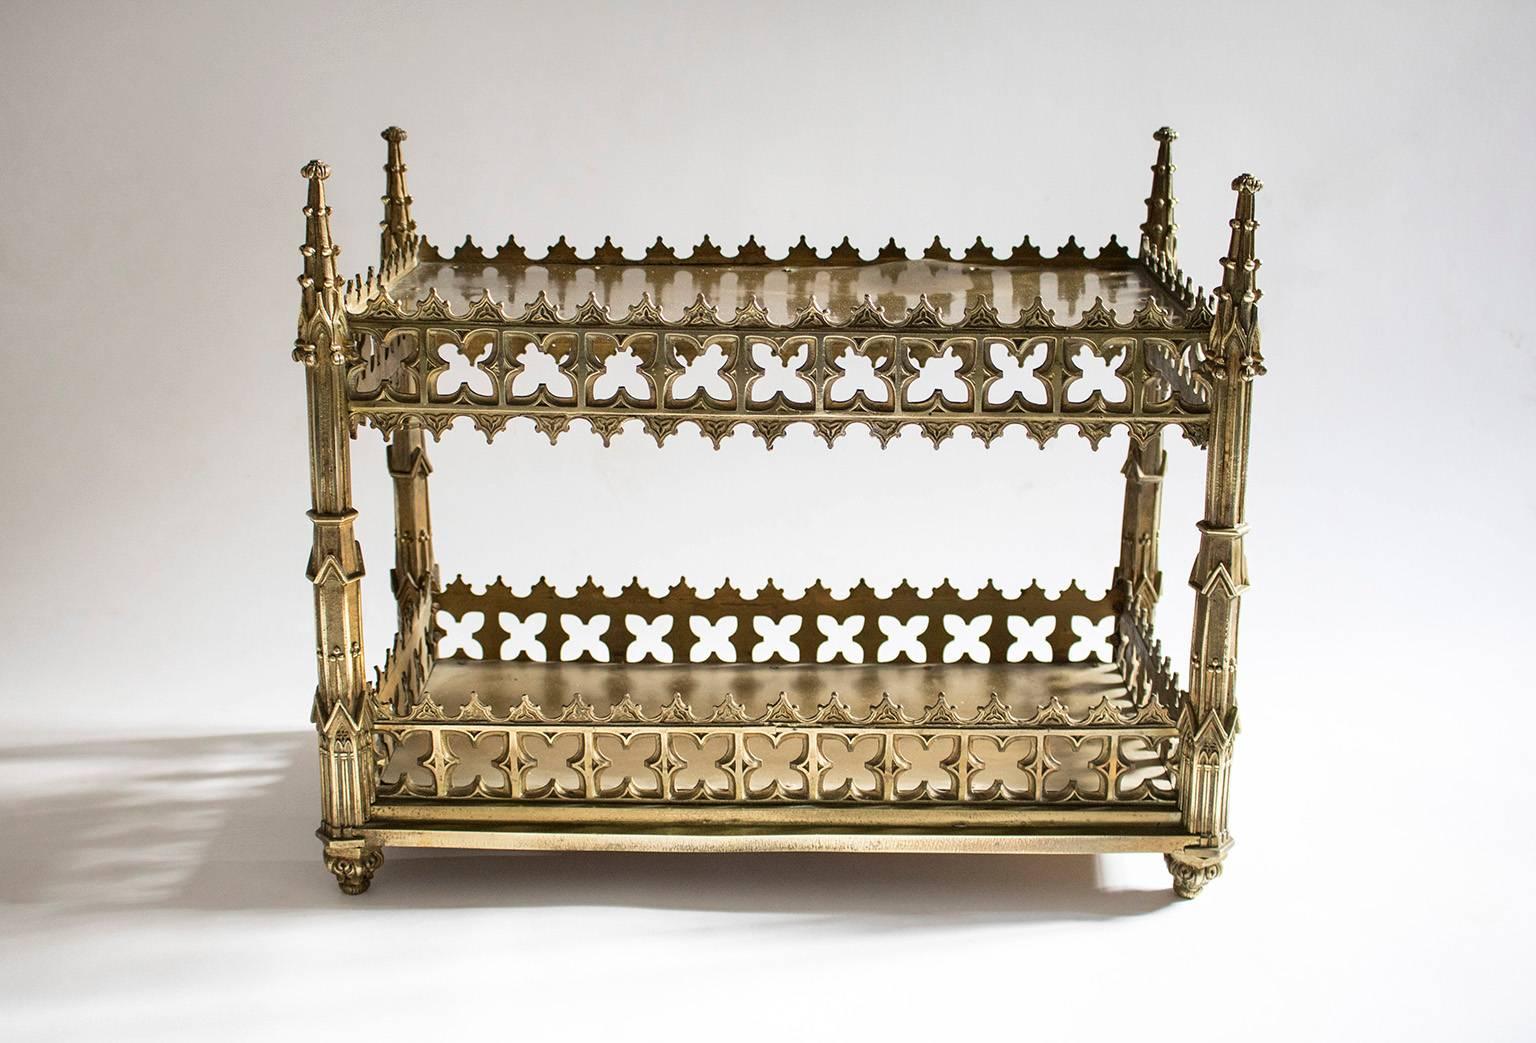 Gilt brass 19th century Gothic reliquary house/display, beautiful condition, highly decorative.

 